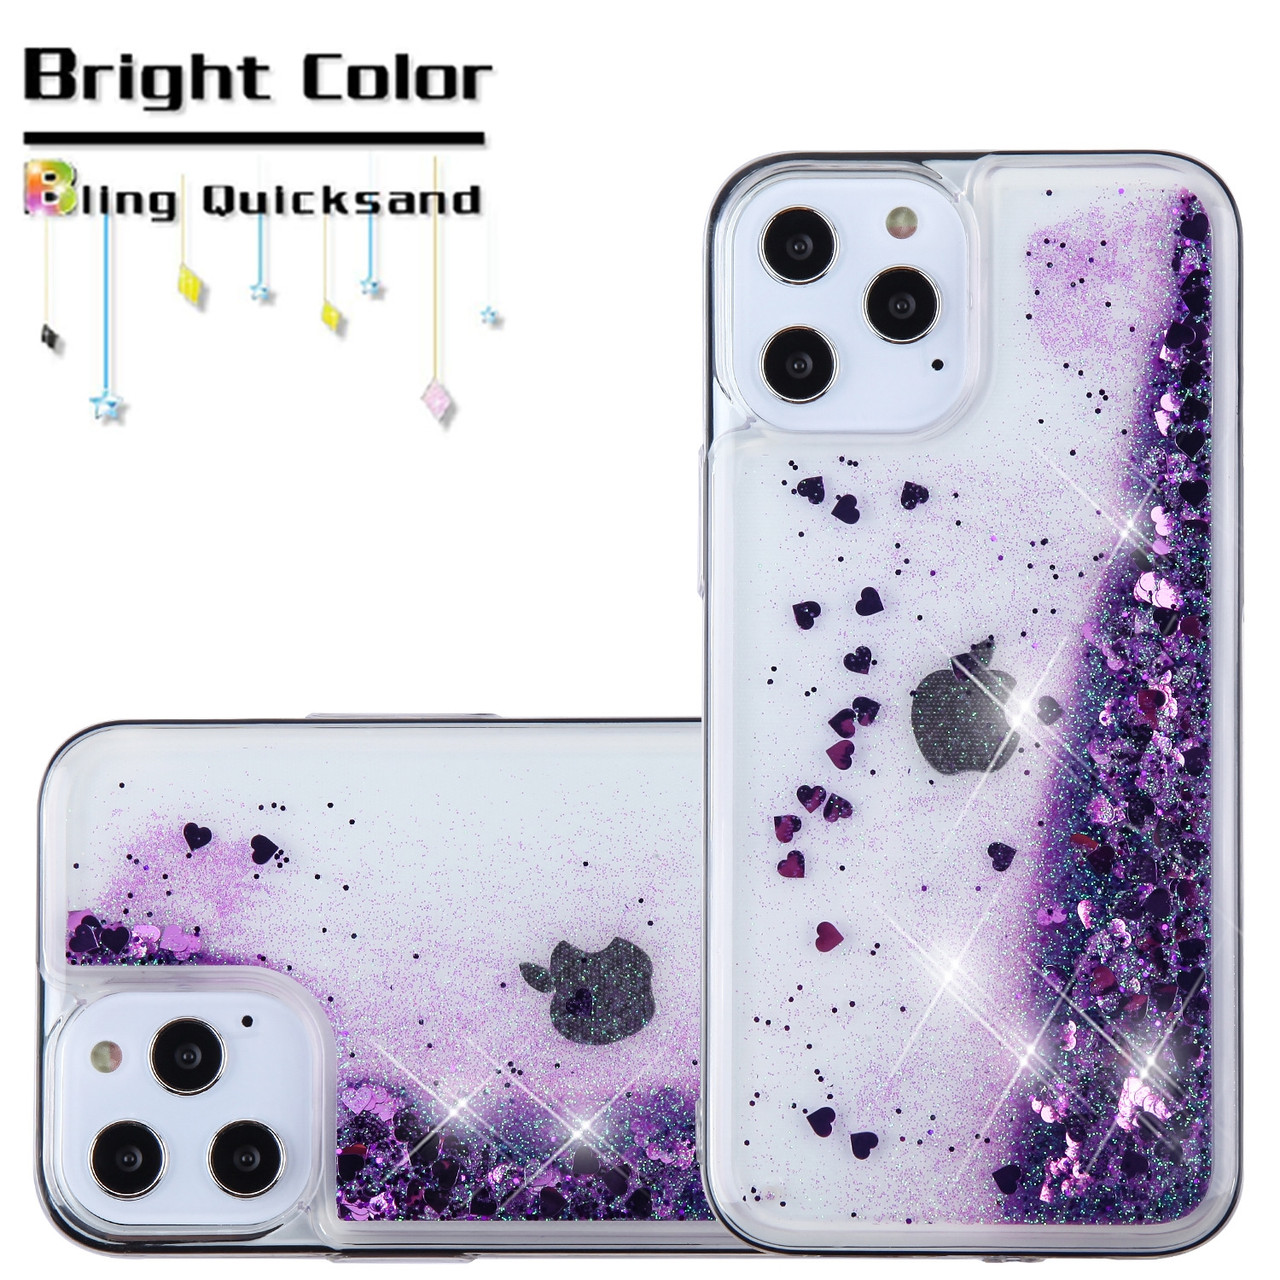 Sale Quicksand Glitter Waterfall Transparent Case For Iphone 12 Pro Max Purple Hd Accessory